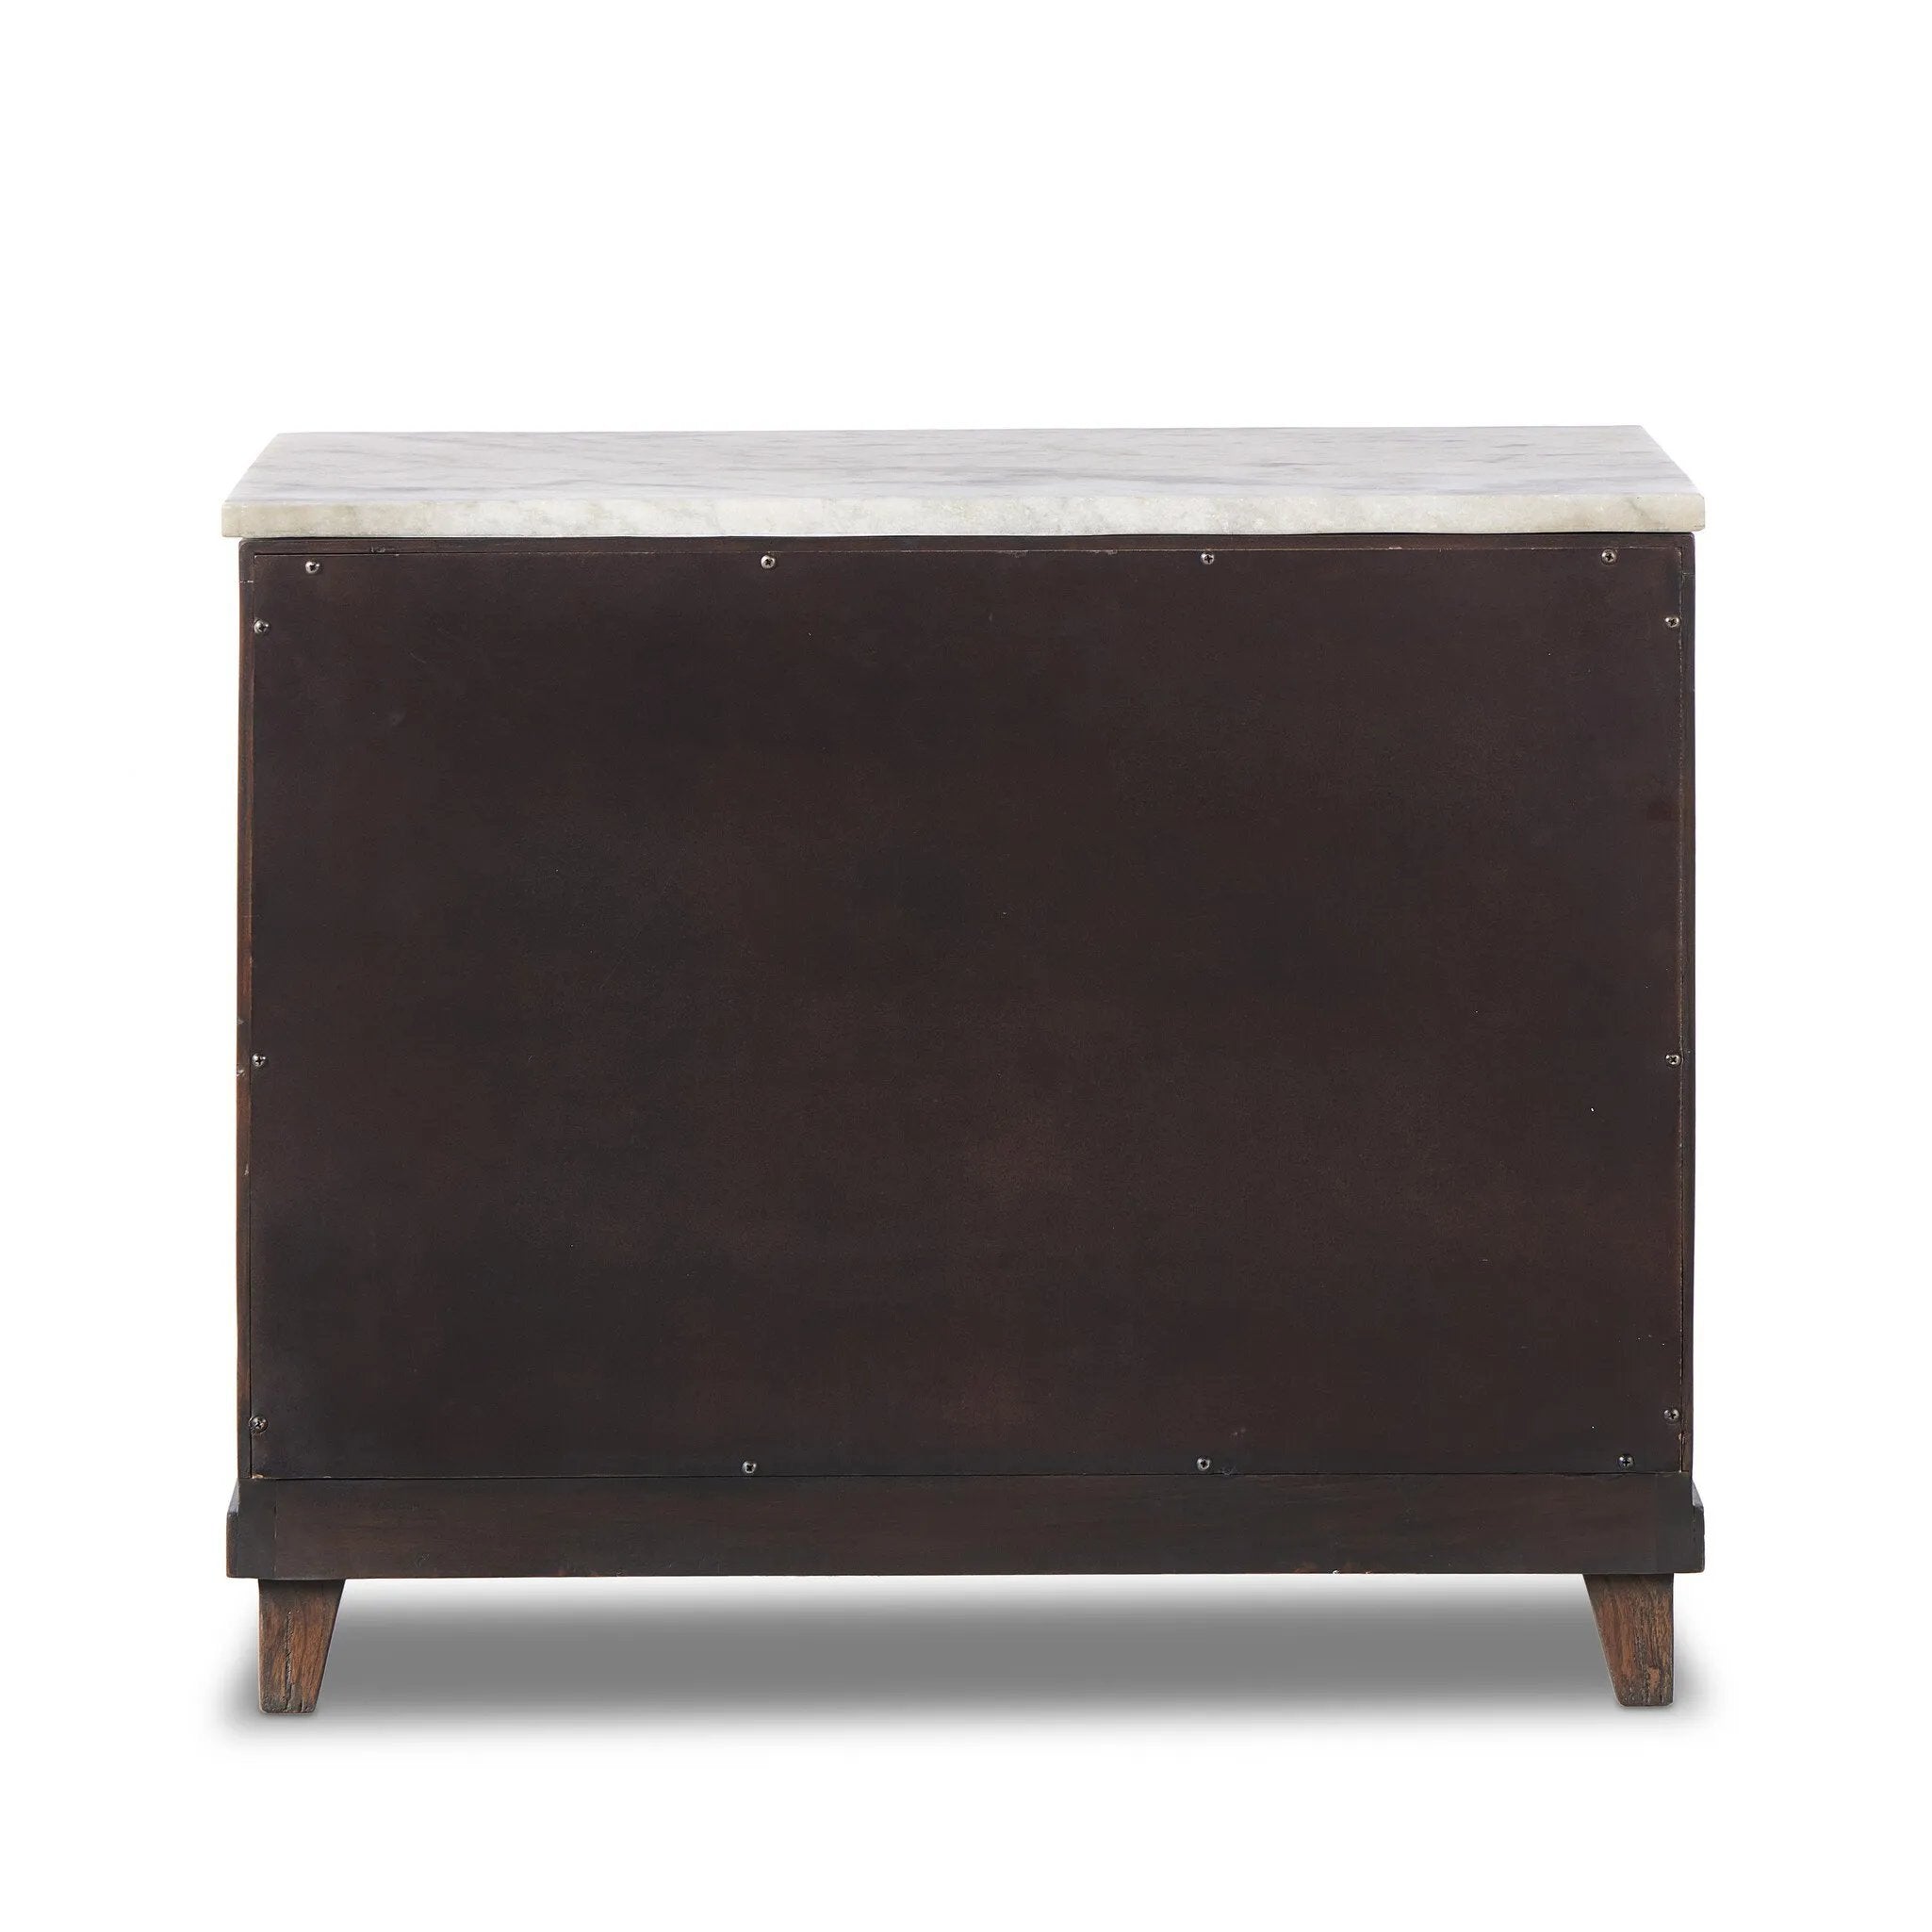 Capturing the charm of vintage French storage, this solid mango wood nightstand stands tall with a polished marble top and softened ogee edges. Three spacious drawers are fitted with classic brass-button hardware. Natural marks and cracks are characteristic of the reclaimed wood.Collection: Harmo Amethyst Home provides interior design, new home construction design consulting, vintage area rugs, and lighting in the Nashville metro area.